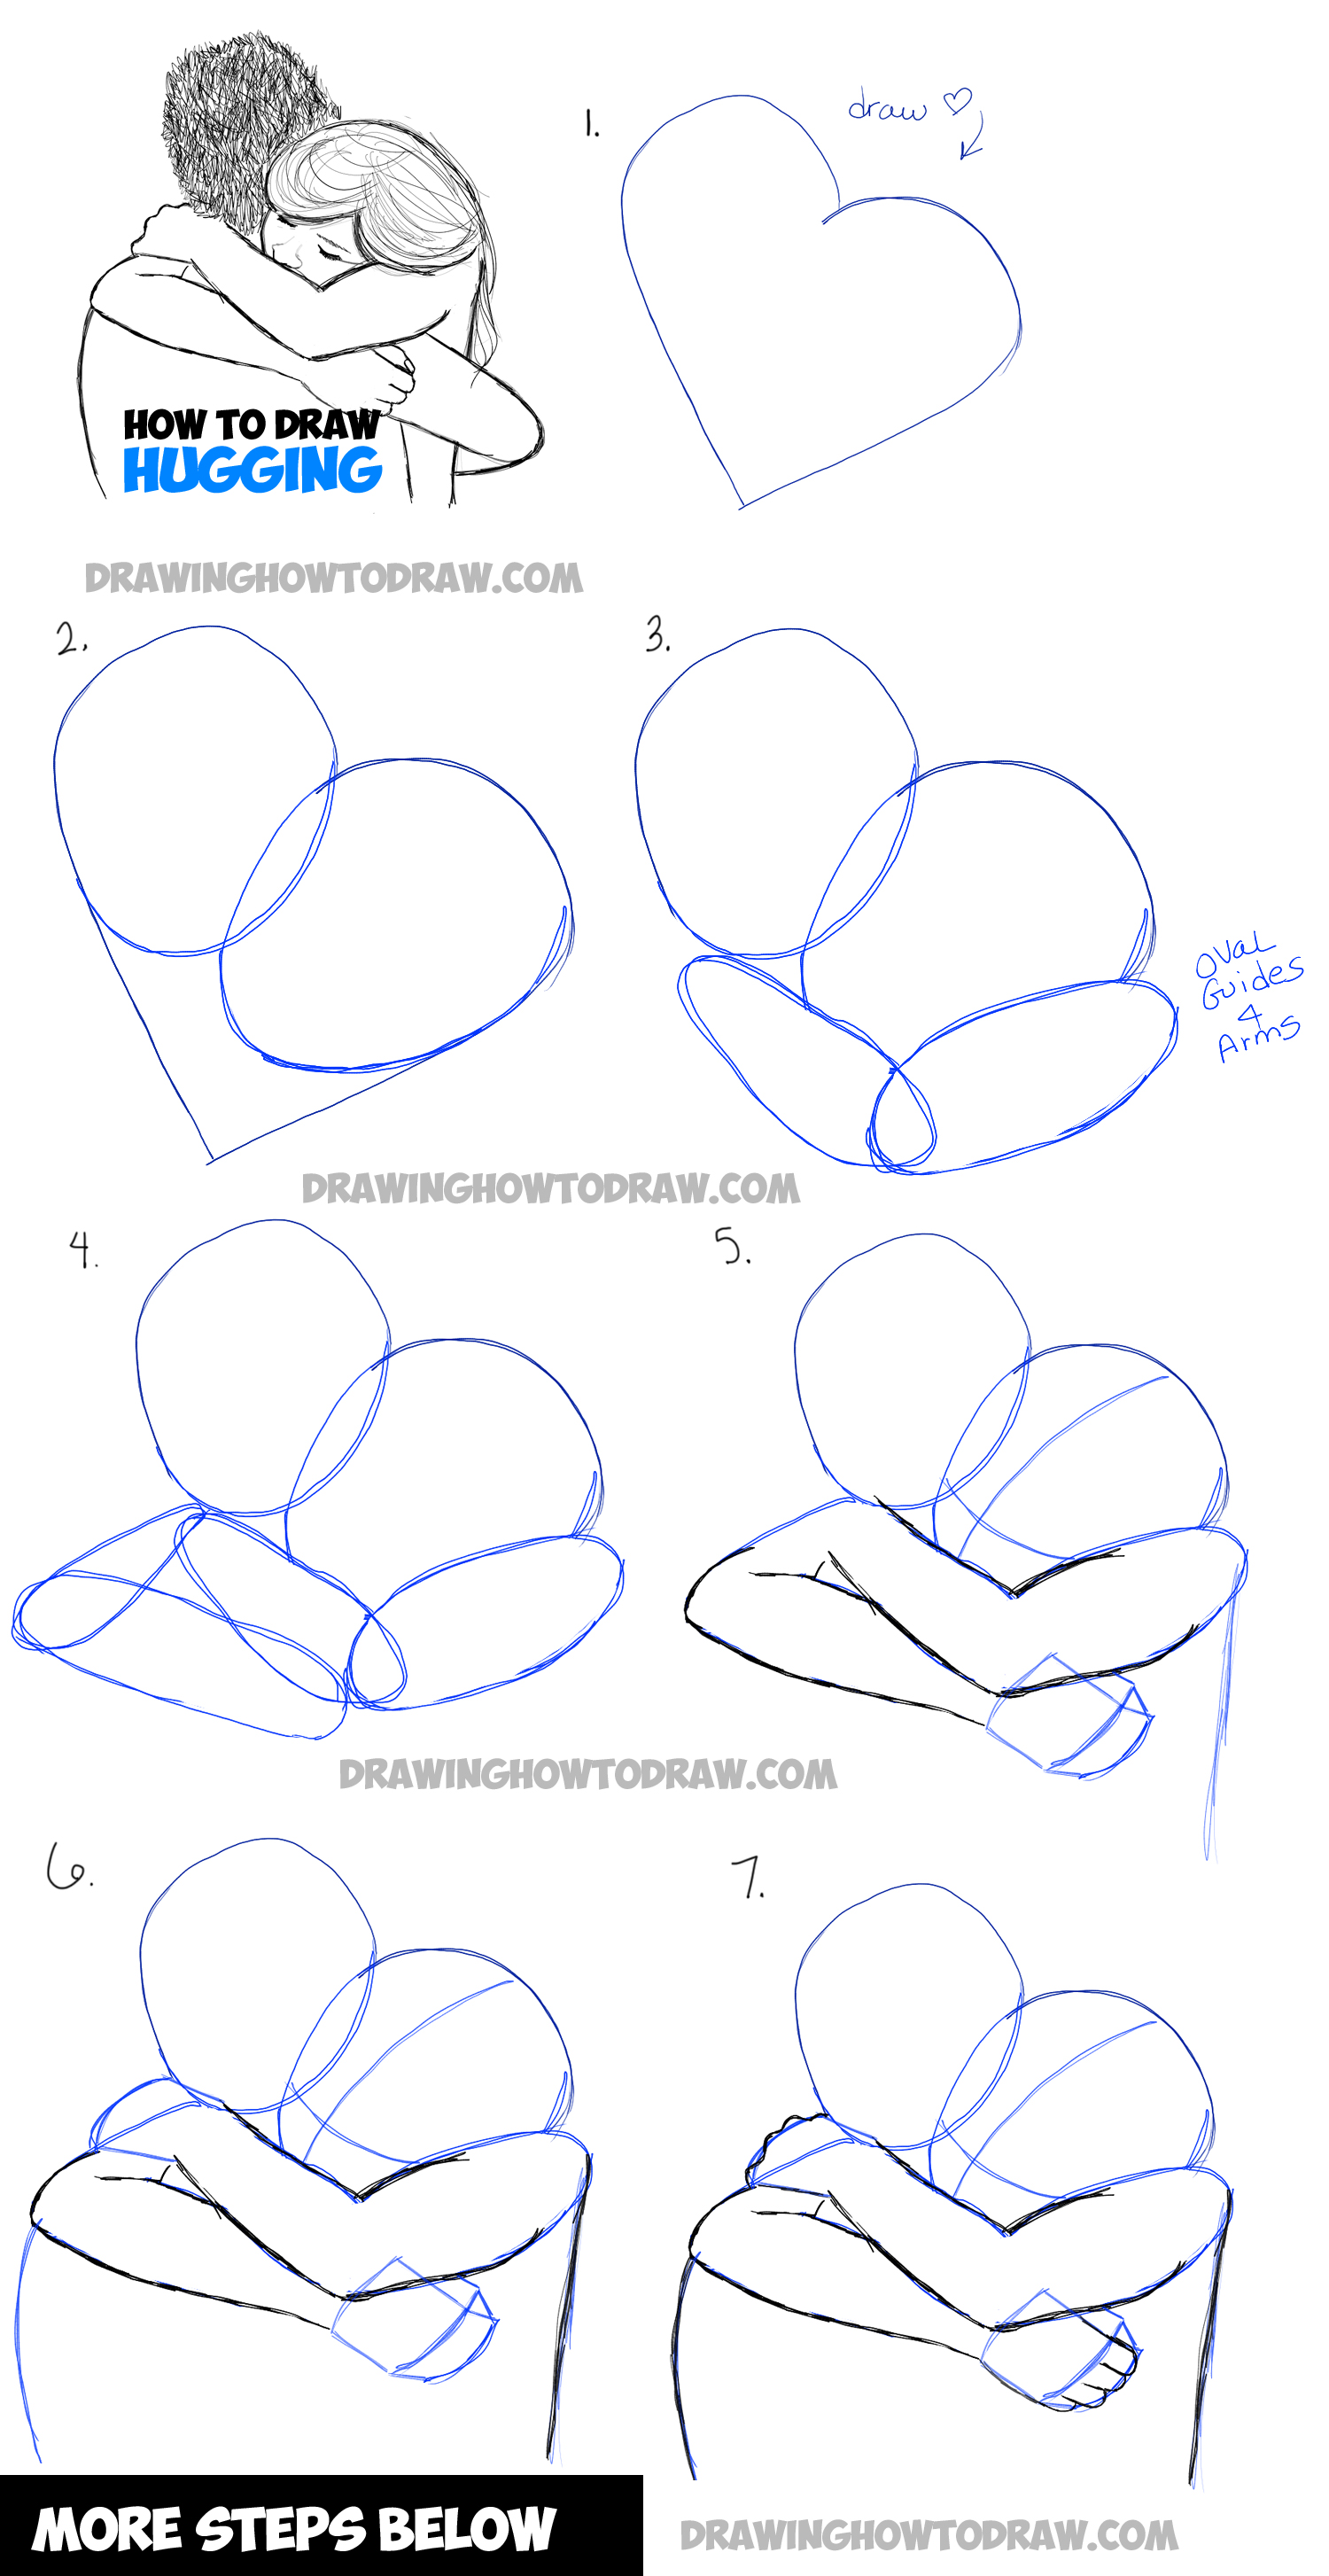 Valentine's Day Drawing // How to Draw Romantic Couple Hugging // Pencil  Sketch Tutorial  In this step by step drawing tutorial video, I have drawn  a romantic couple hugging. I have